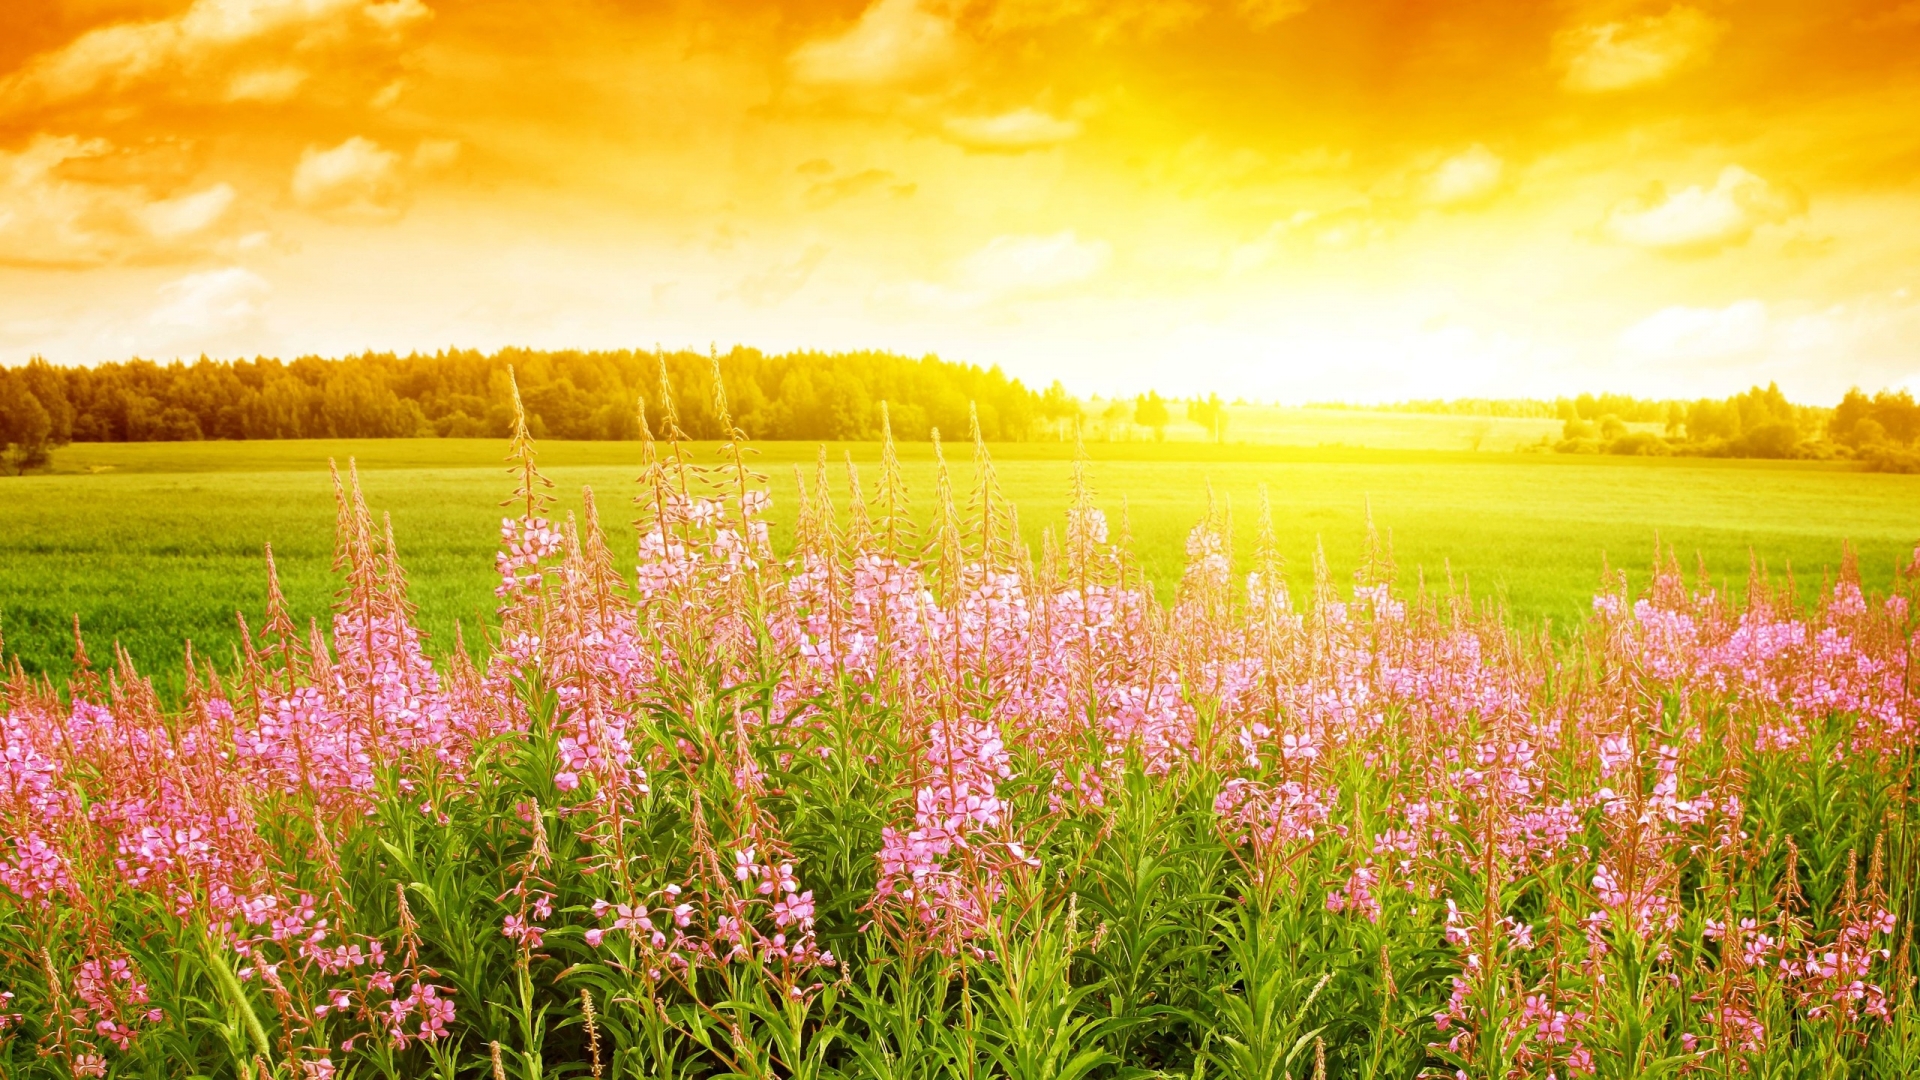 Bright Summer Meadow Wallpaper And Image Pictures